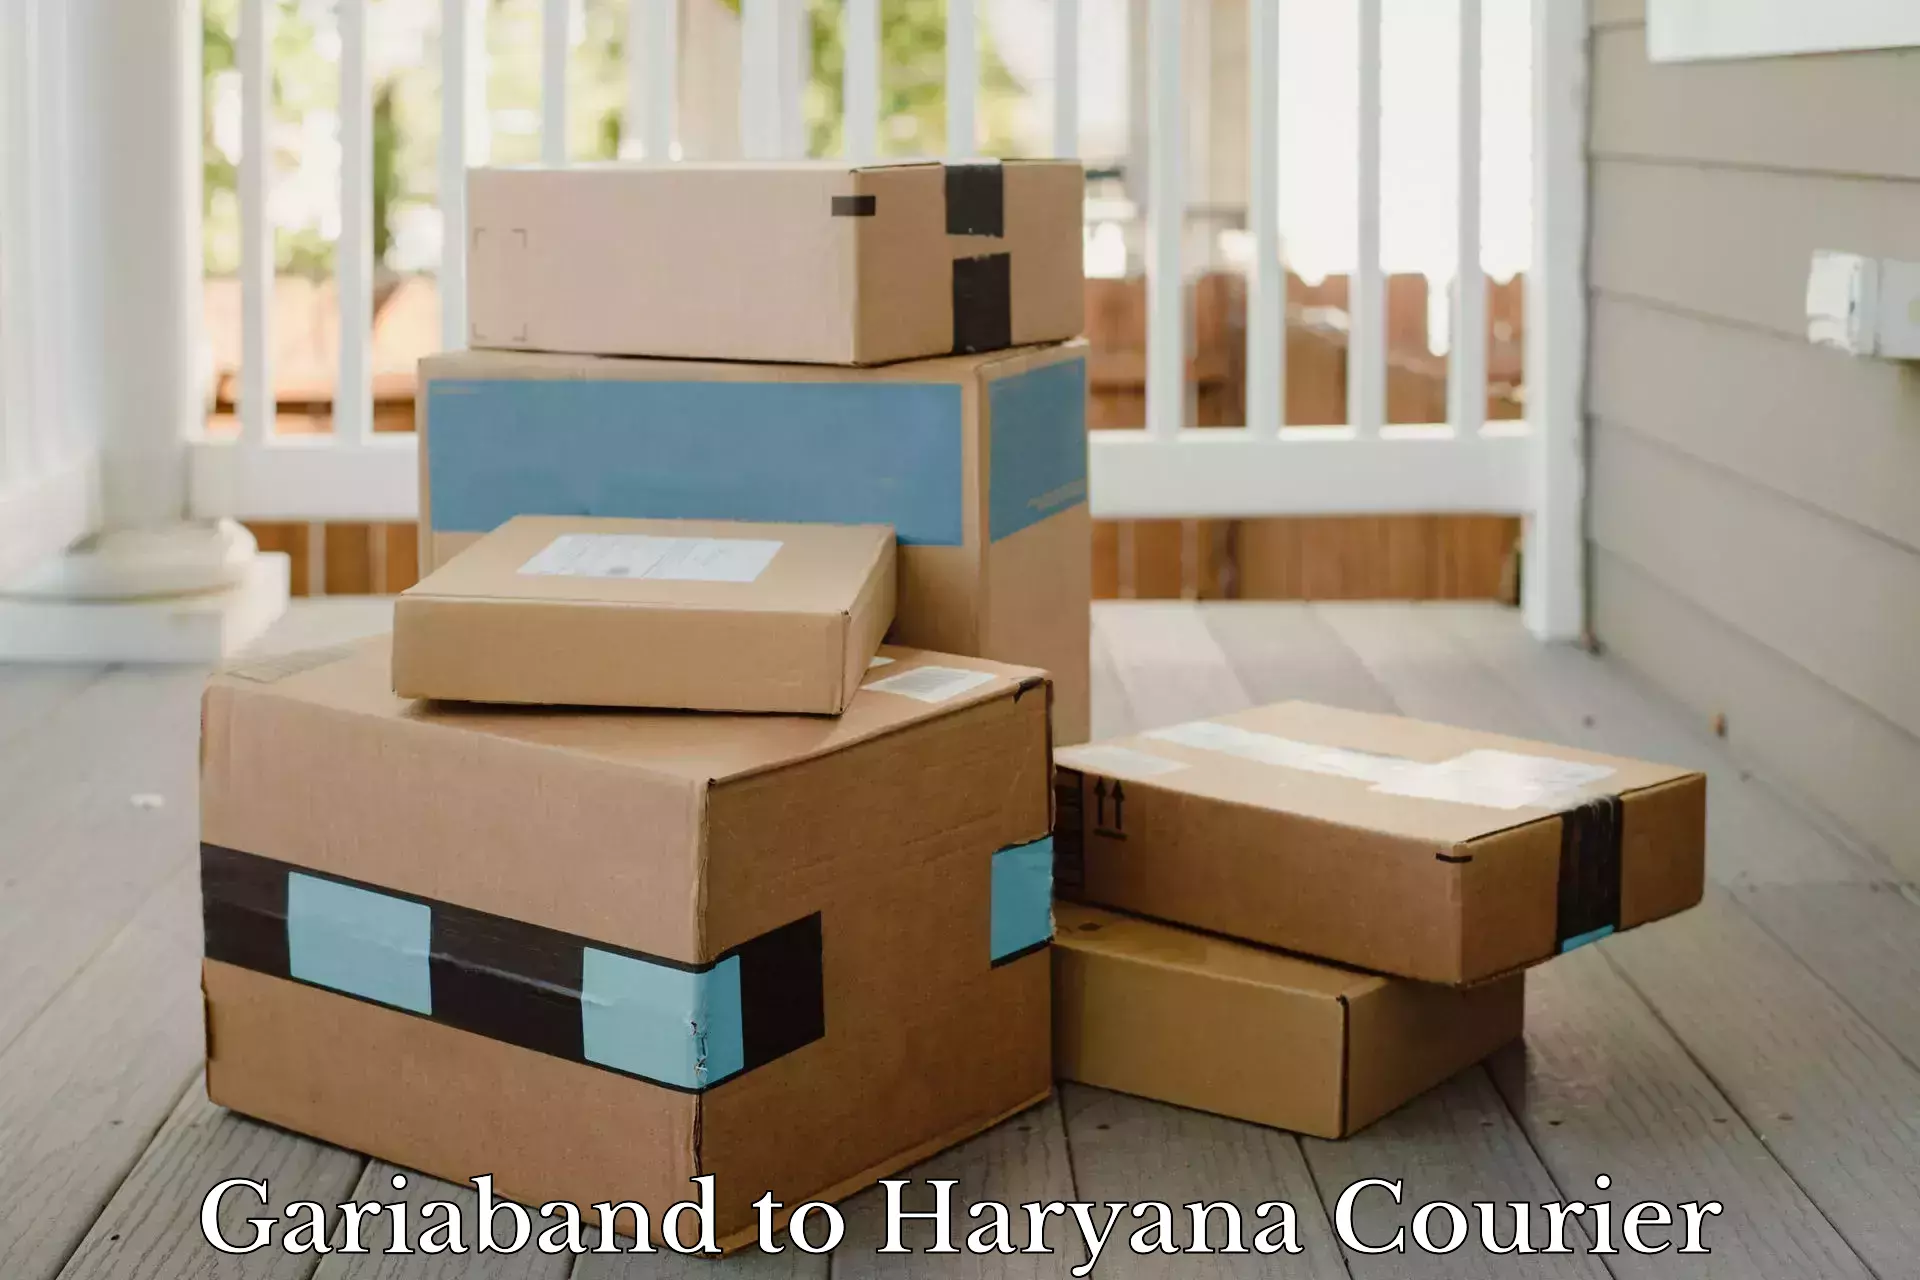 Subscription-based courier Gariaband to Haryana